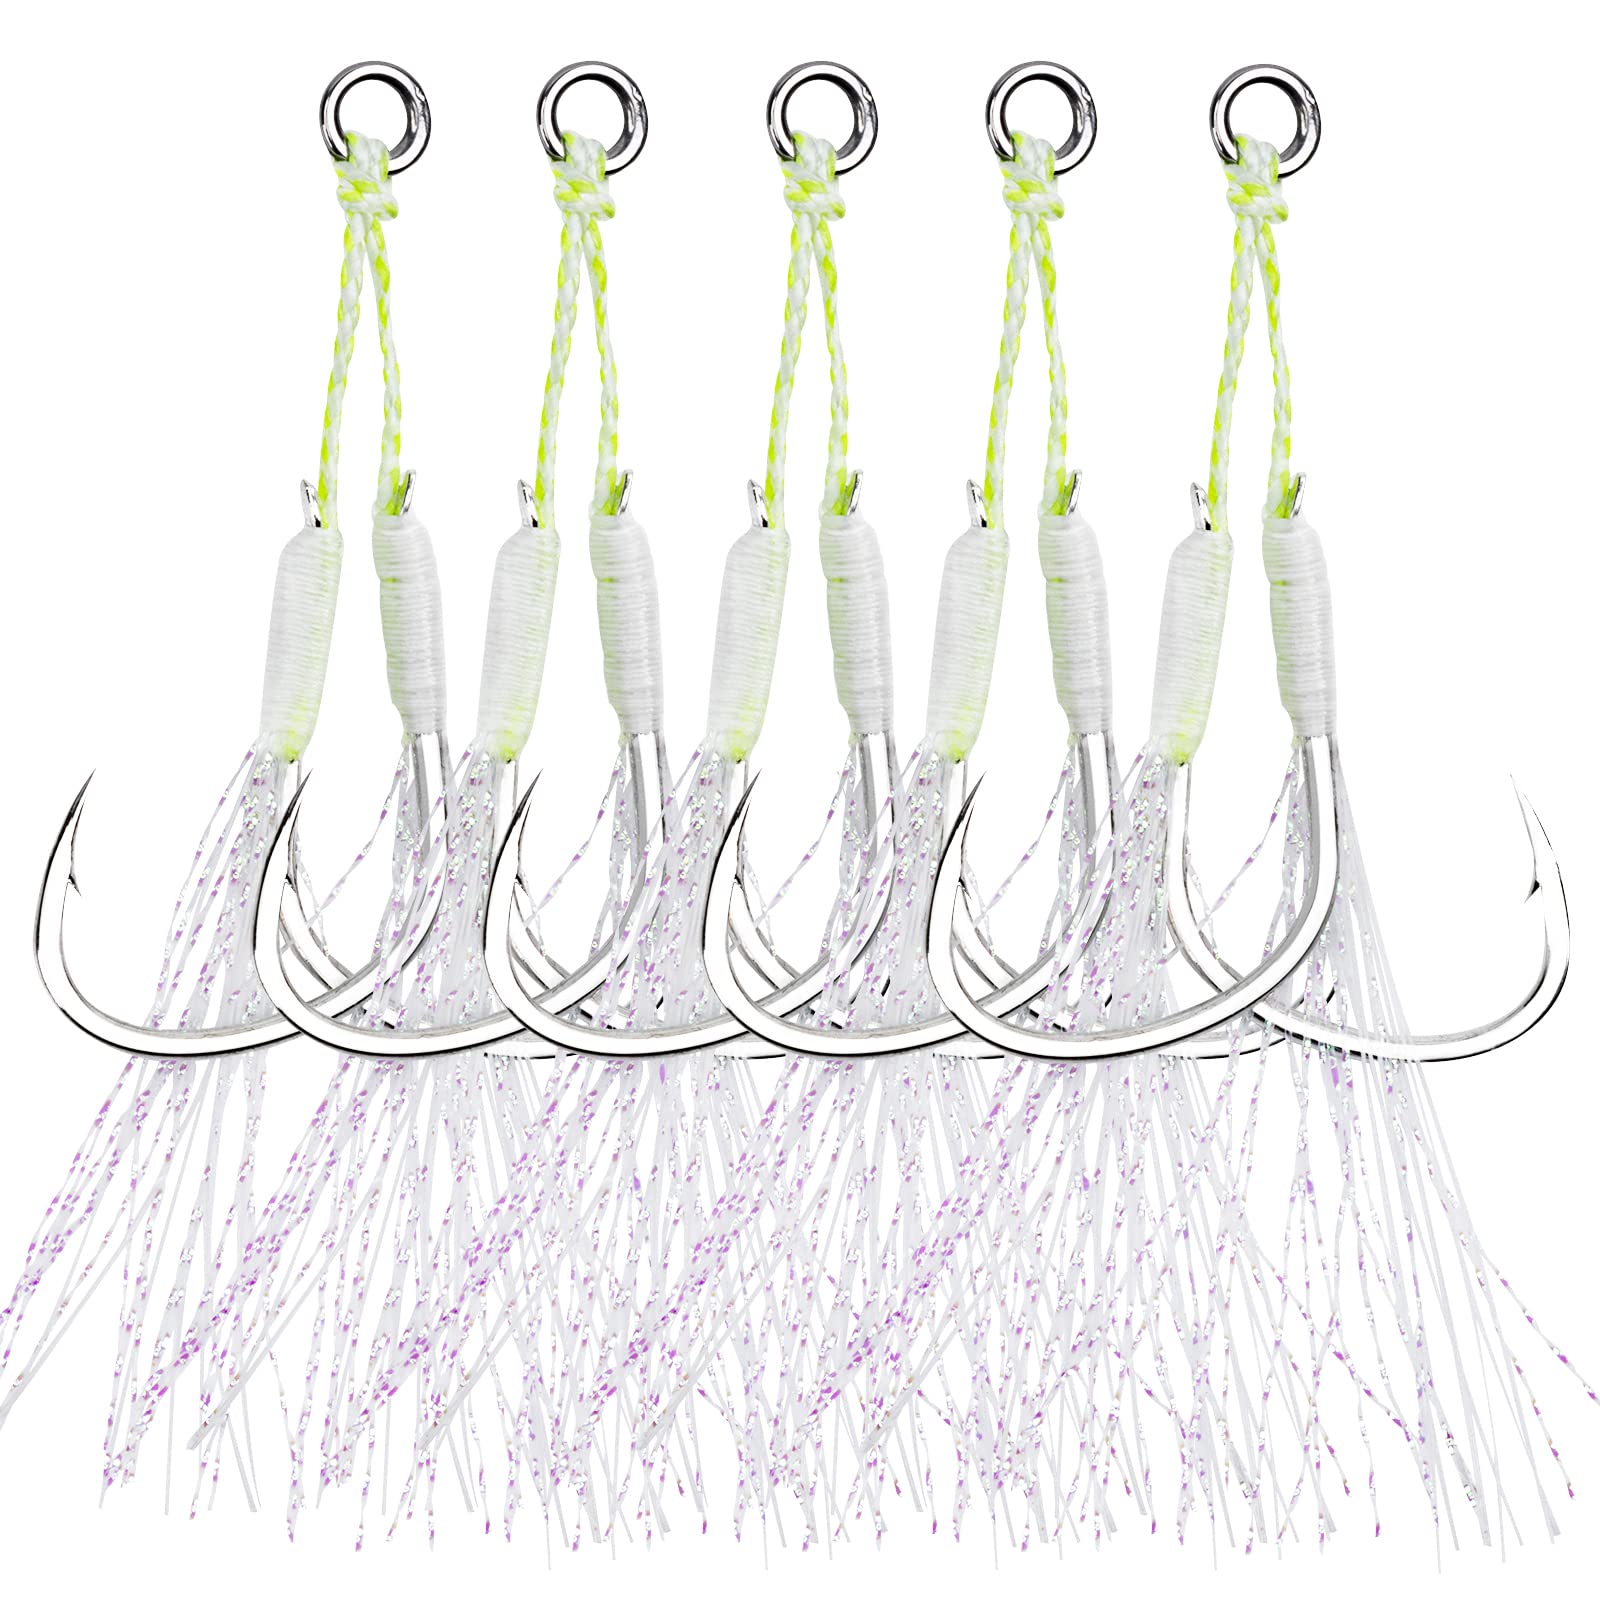 Stainless Steel Assist Hooks Jigging Fishing Hook with PE Line 1/0